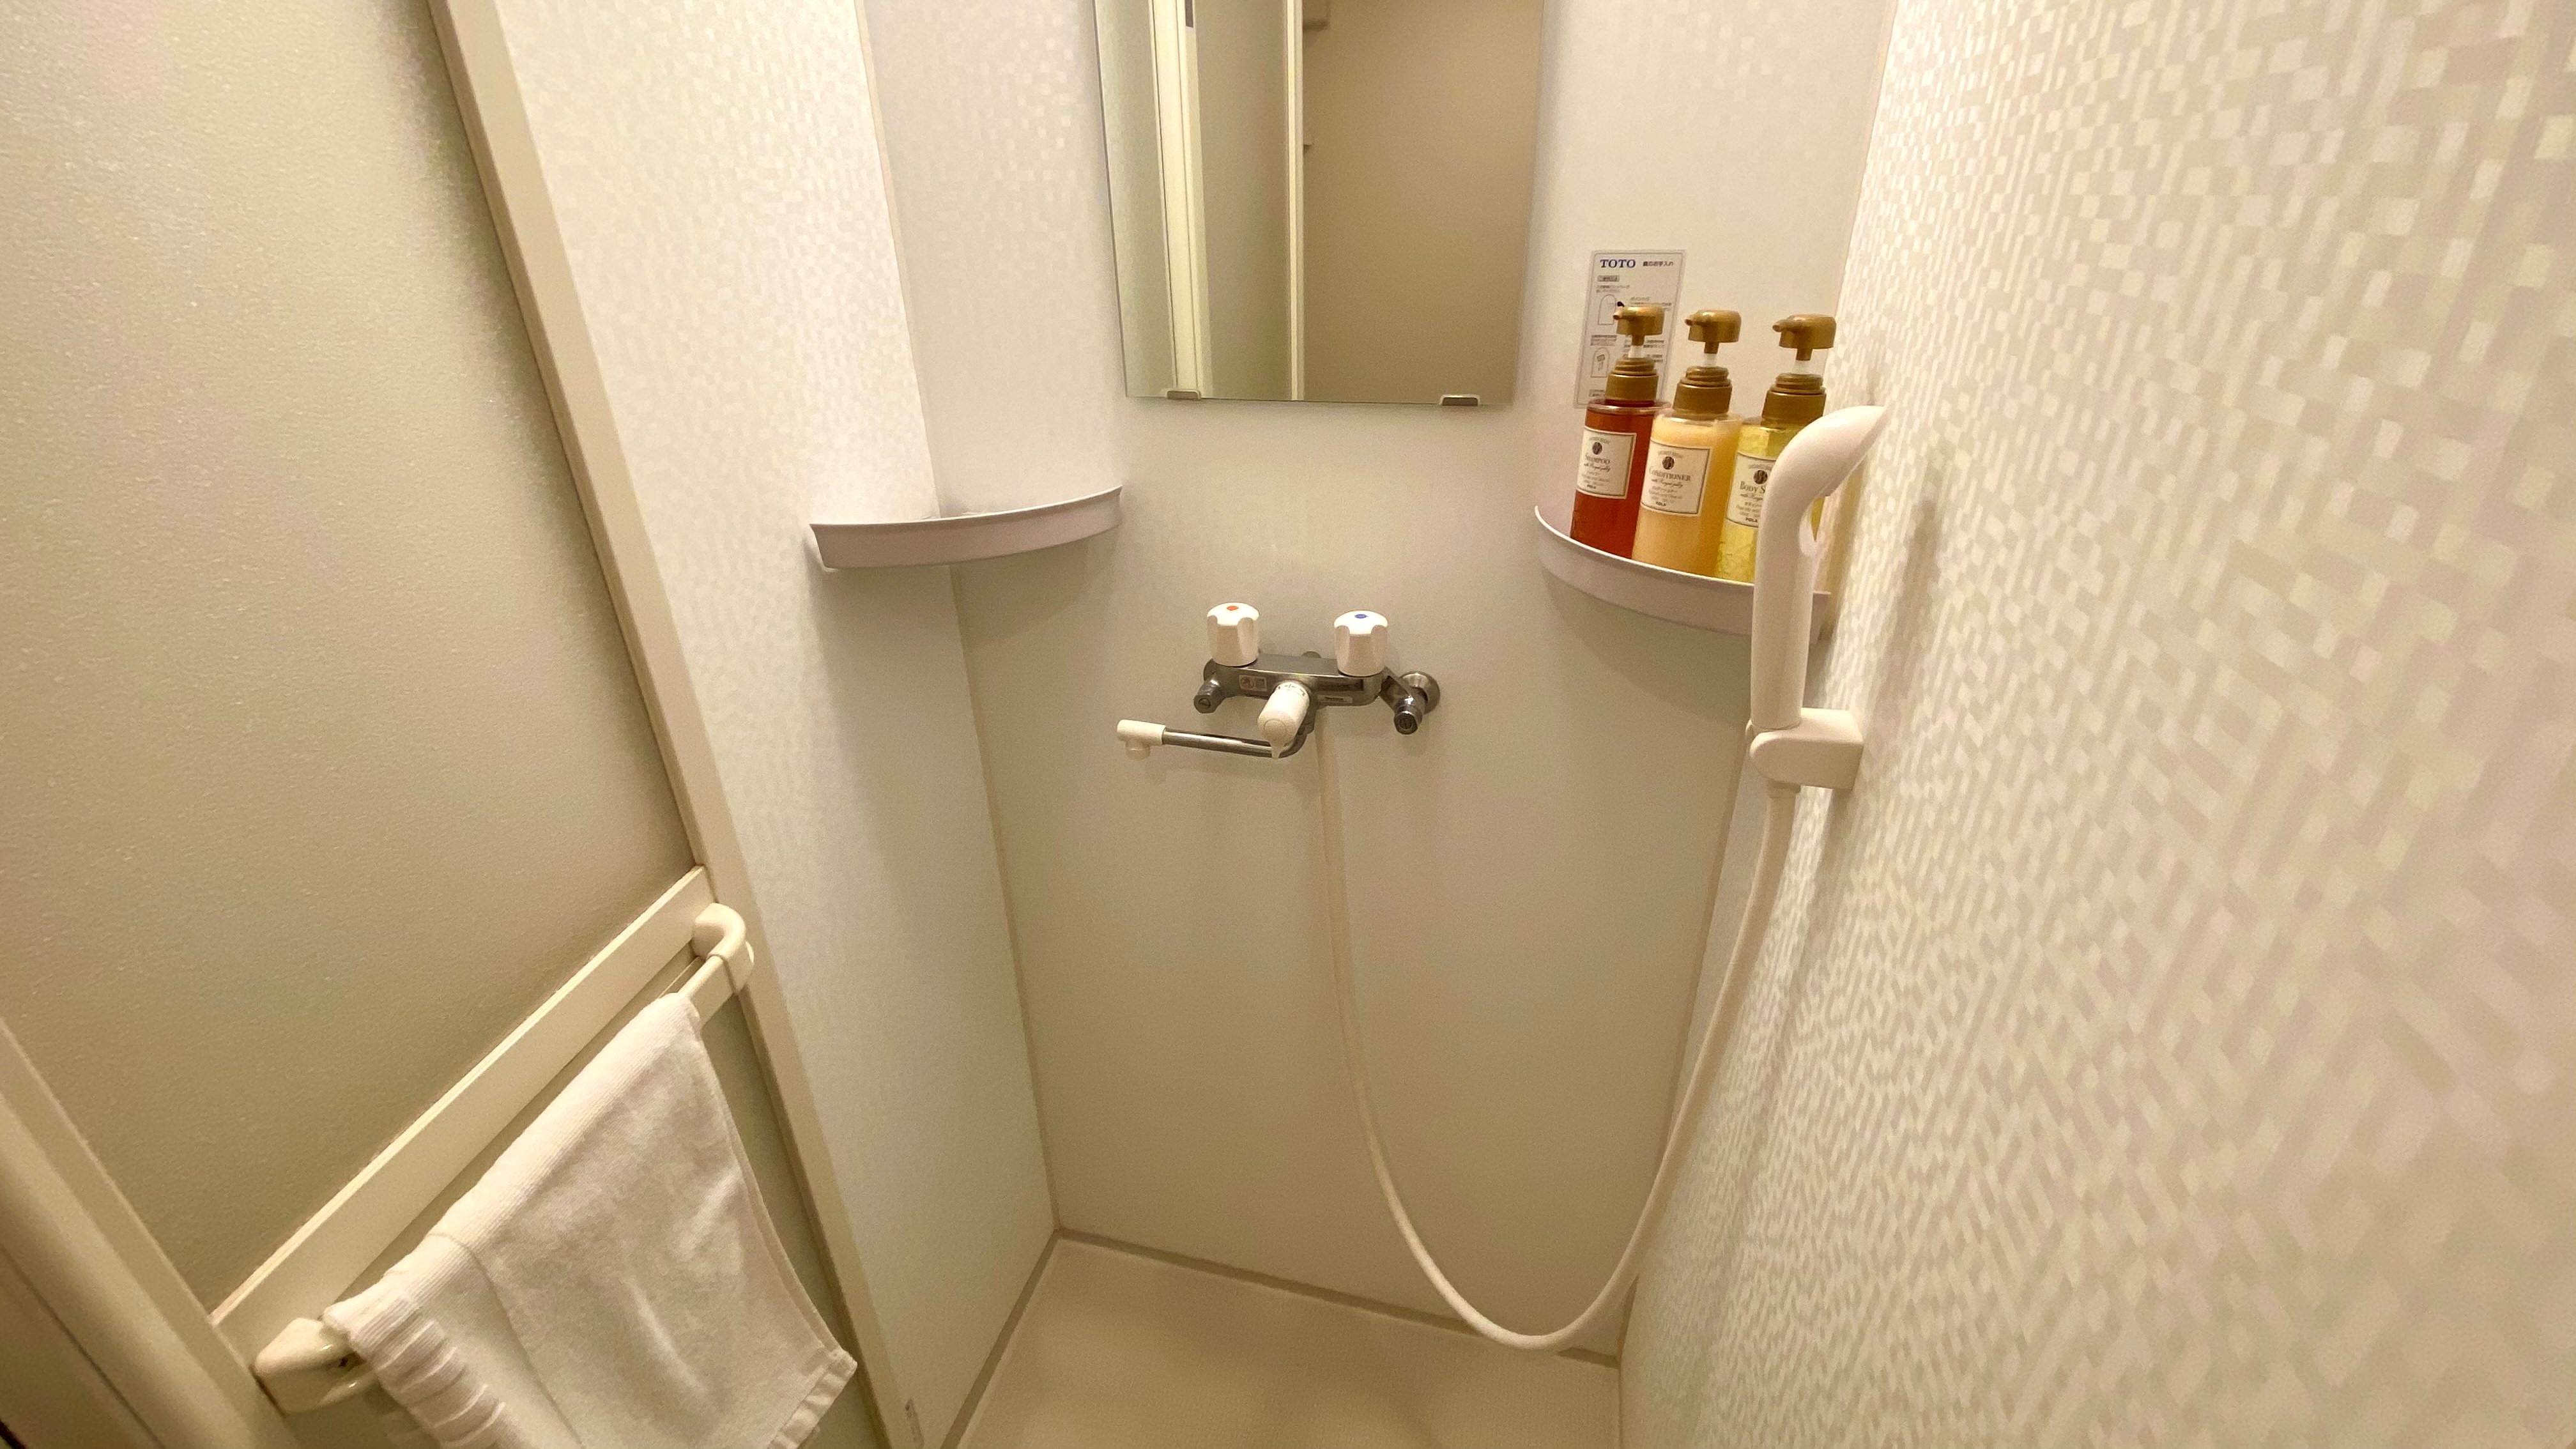 [Guest room] Shower booth